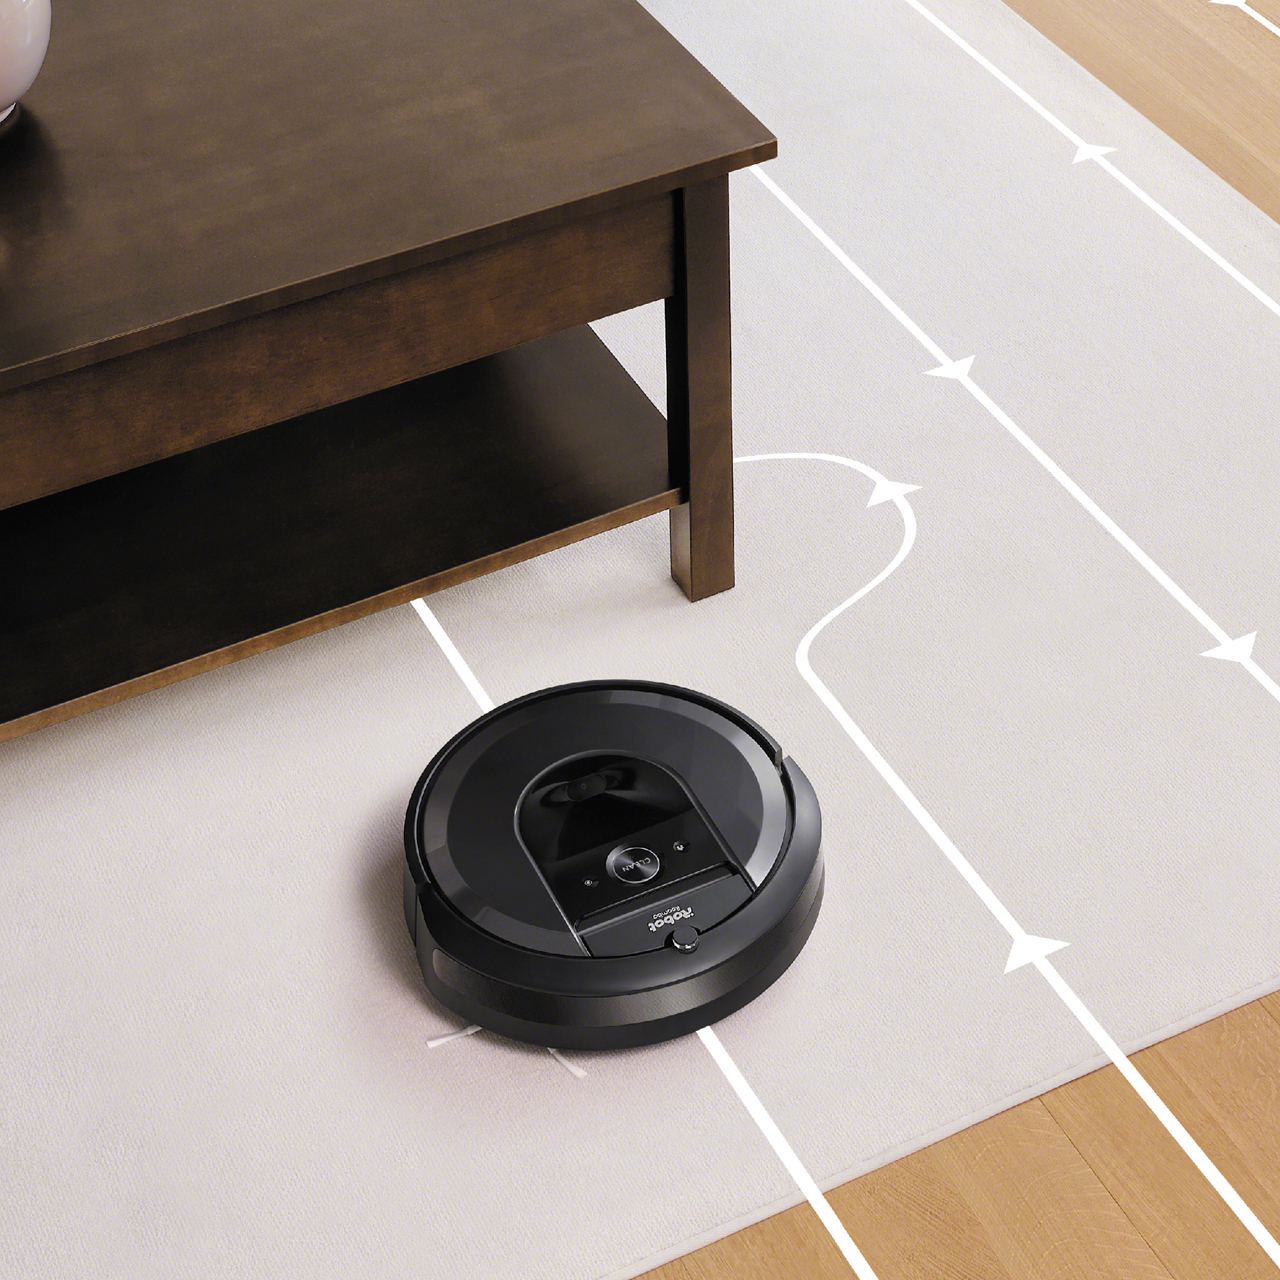 Irobot Roomba I7558 Bagless Robotic Vacuum Cleaner With Auto Dirt Disposal System Charcoal